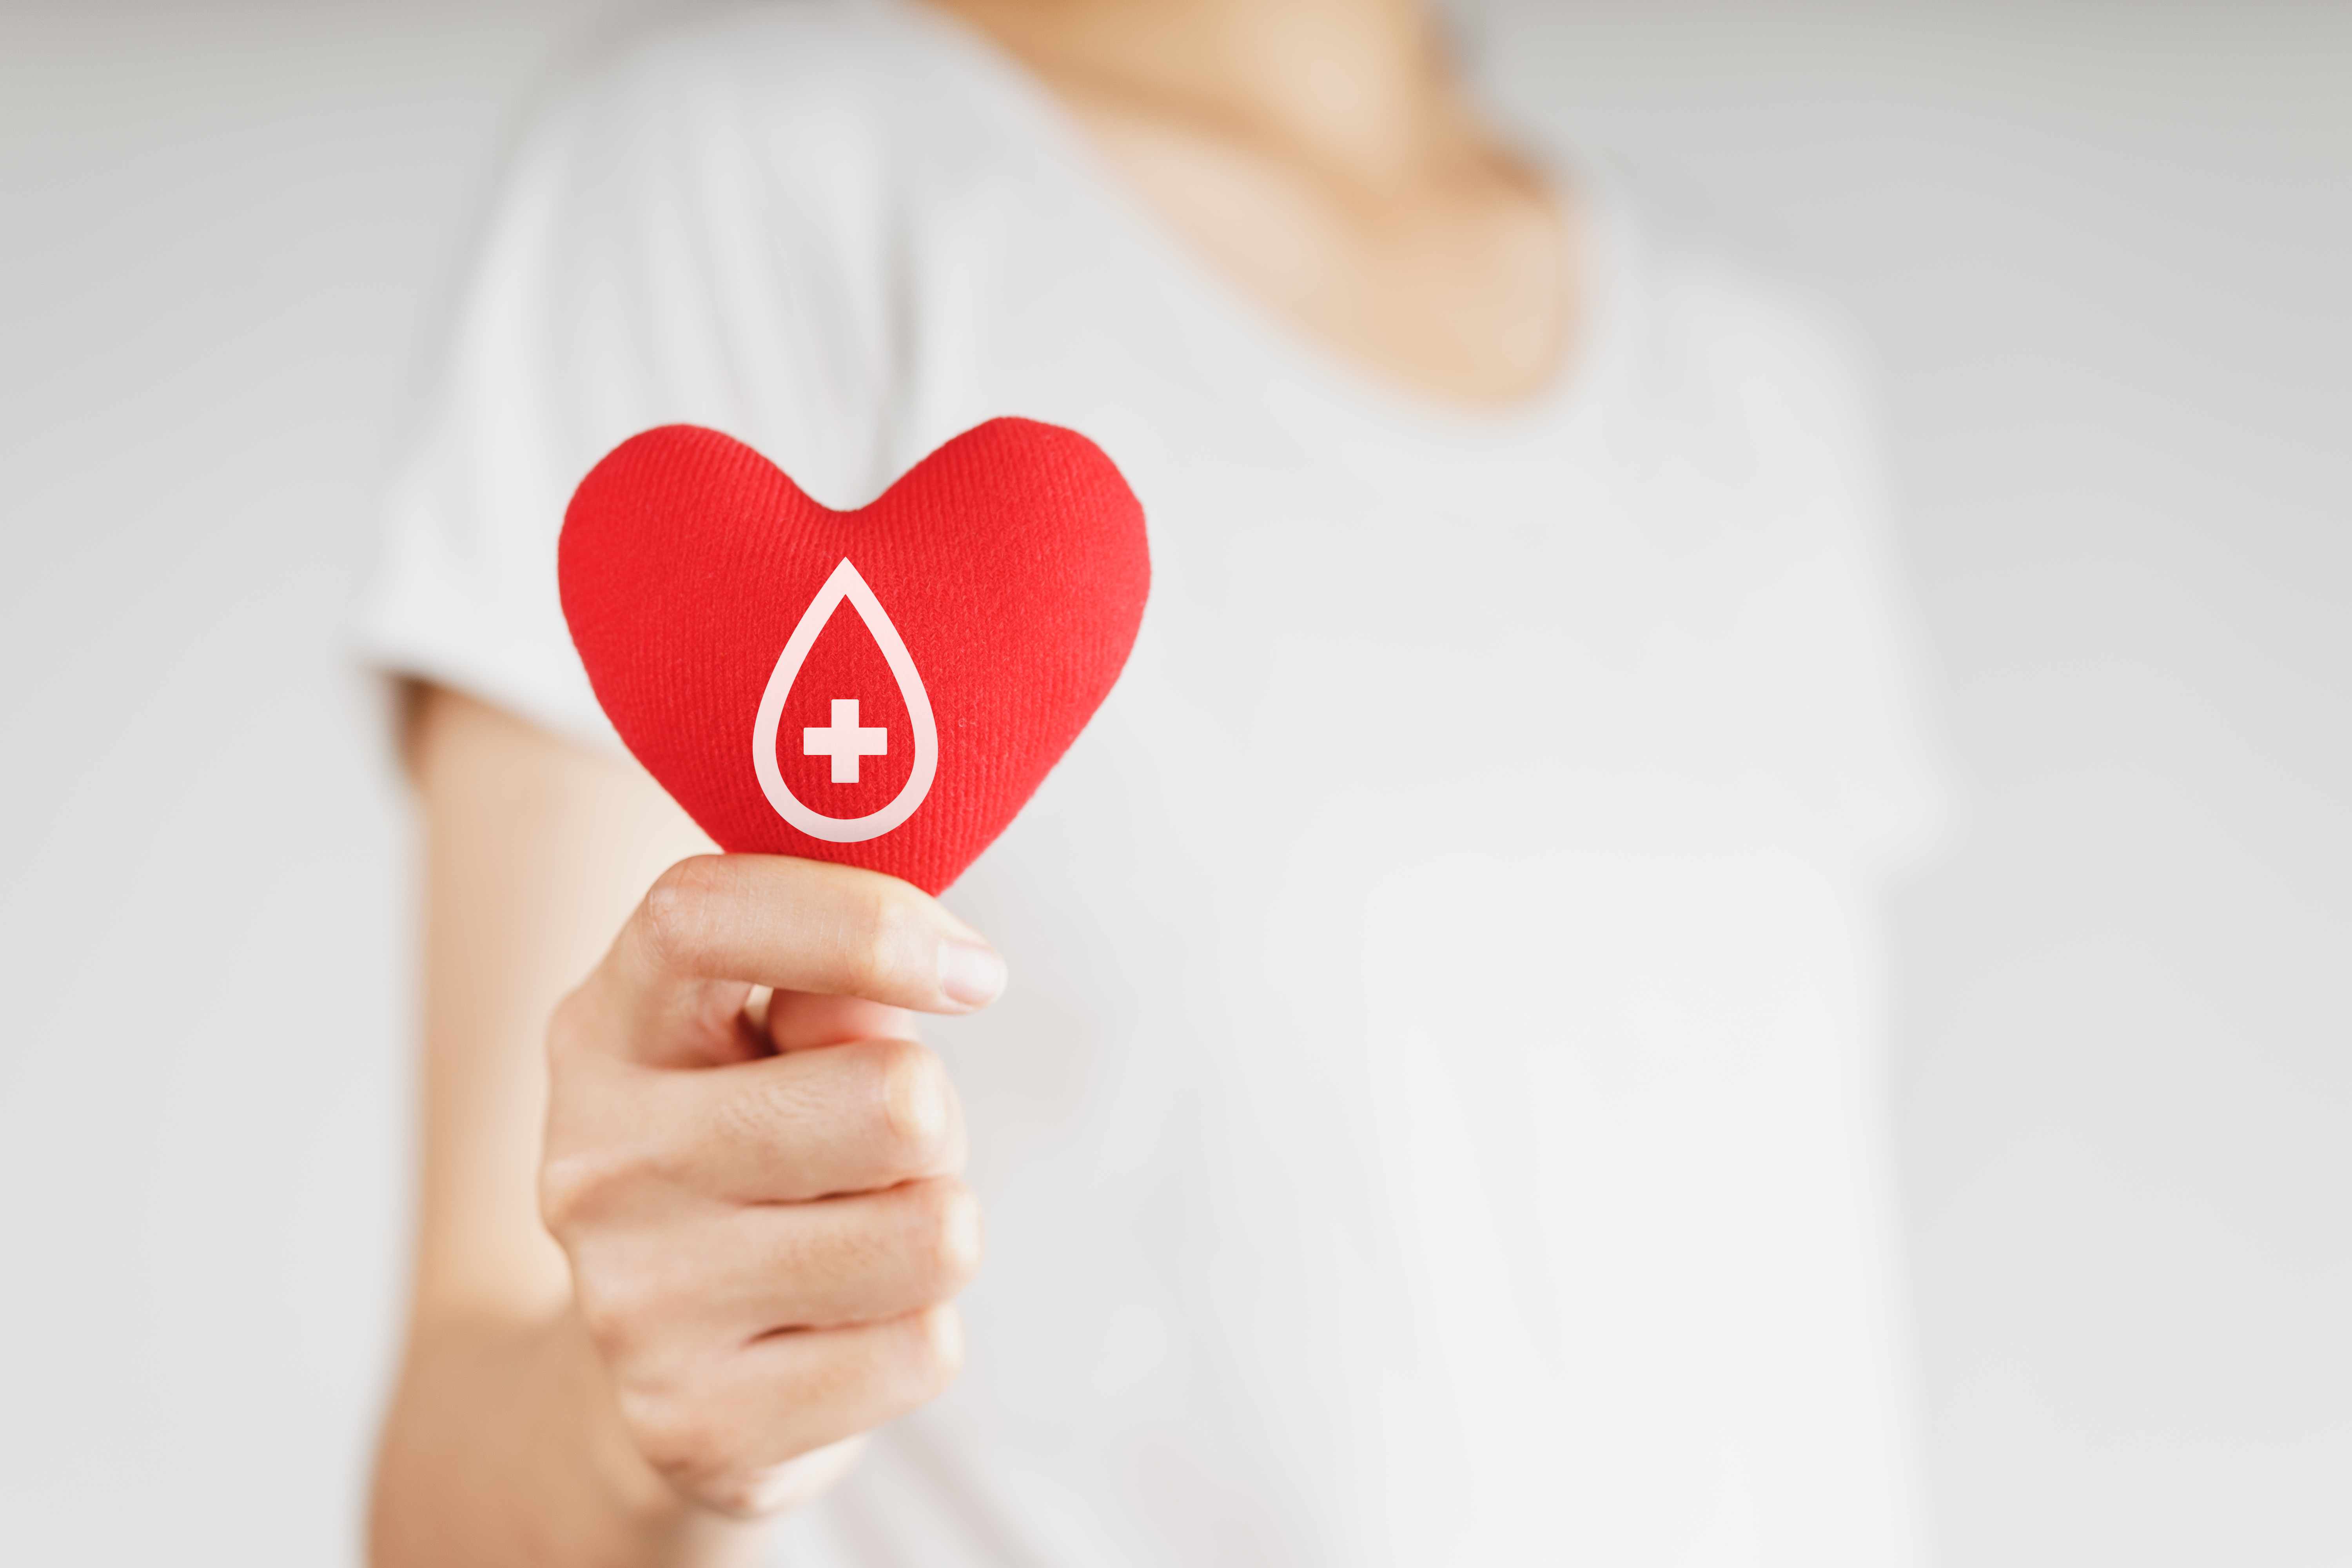 vecteezy_woman-hands-holding-red-heart-with-blood-donor-sign-healthcare-medicine-and-blood-donation-concept_2910448.jpg